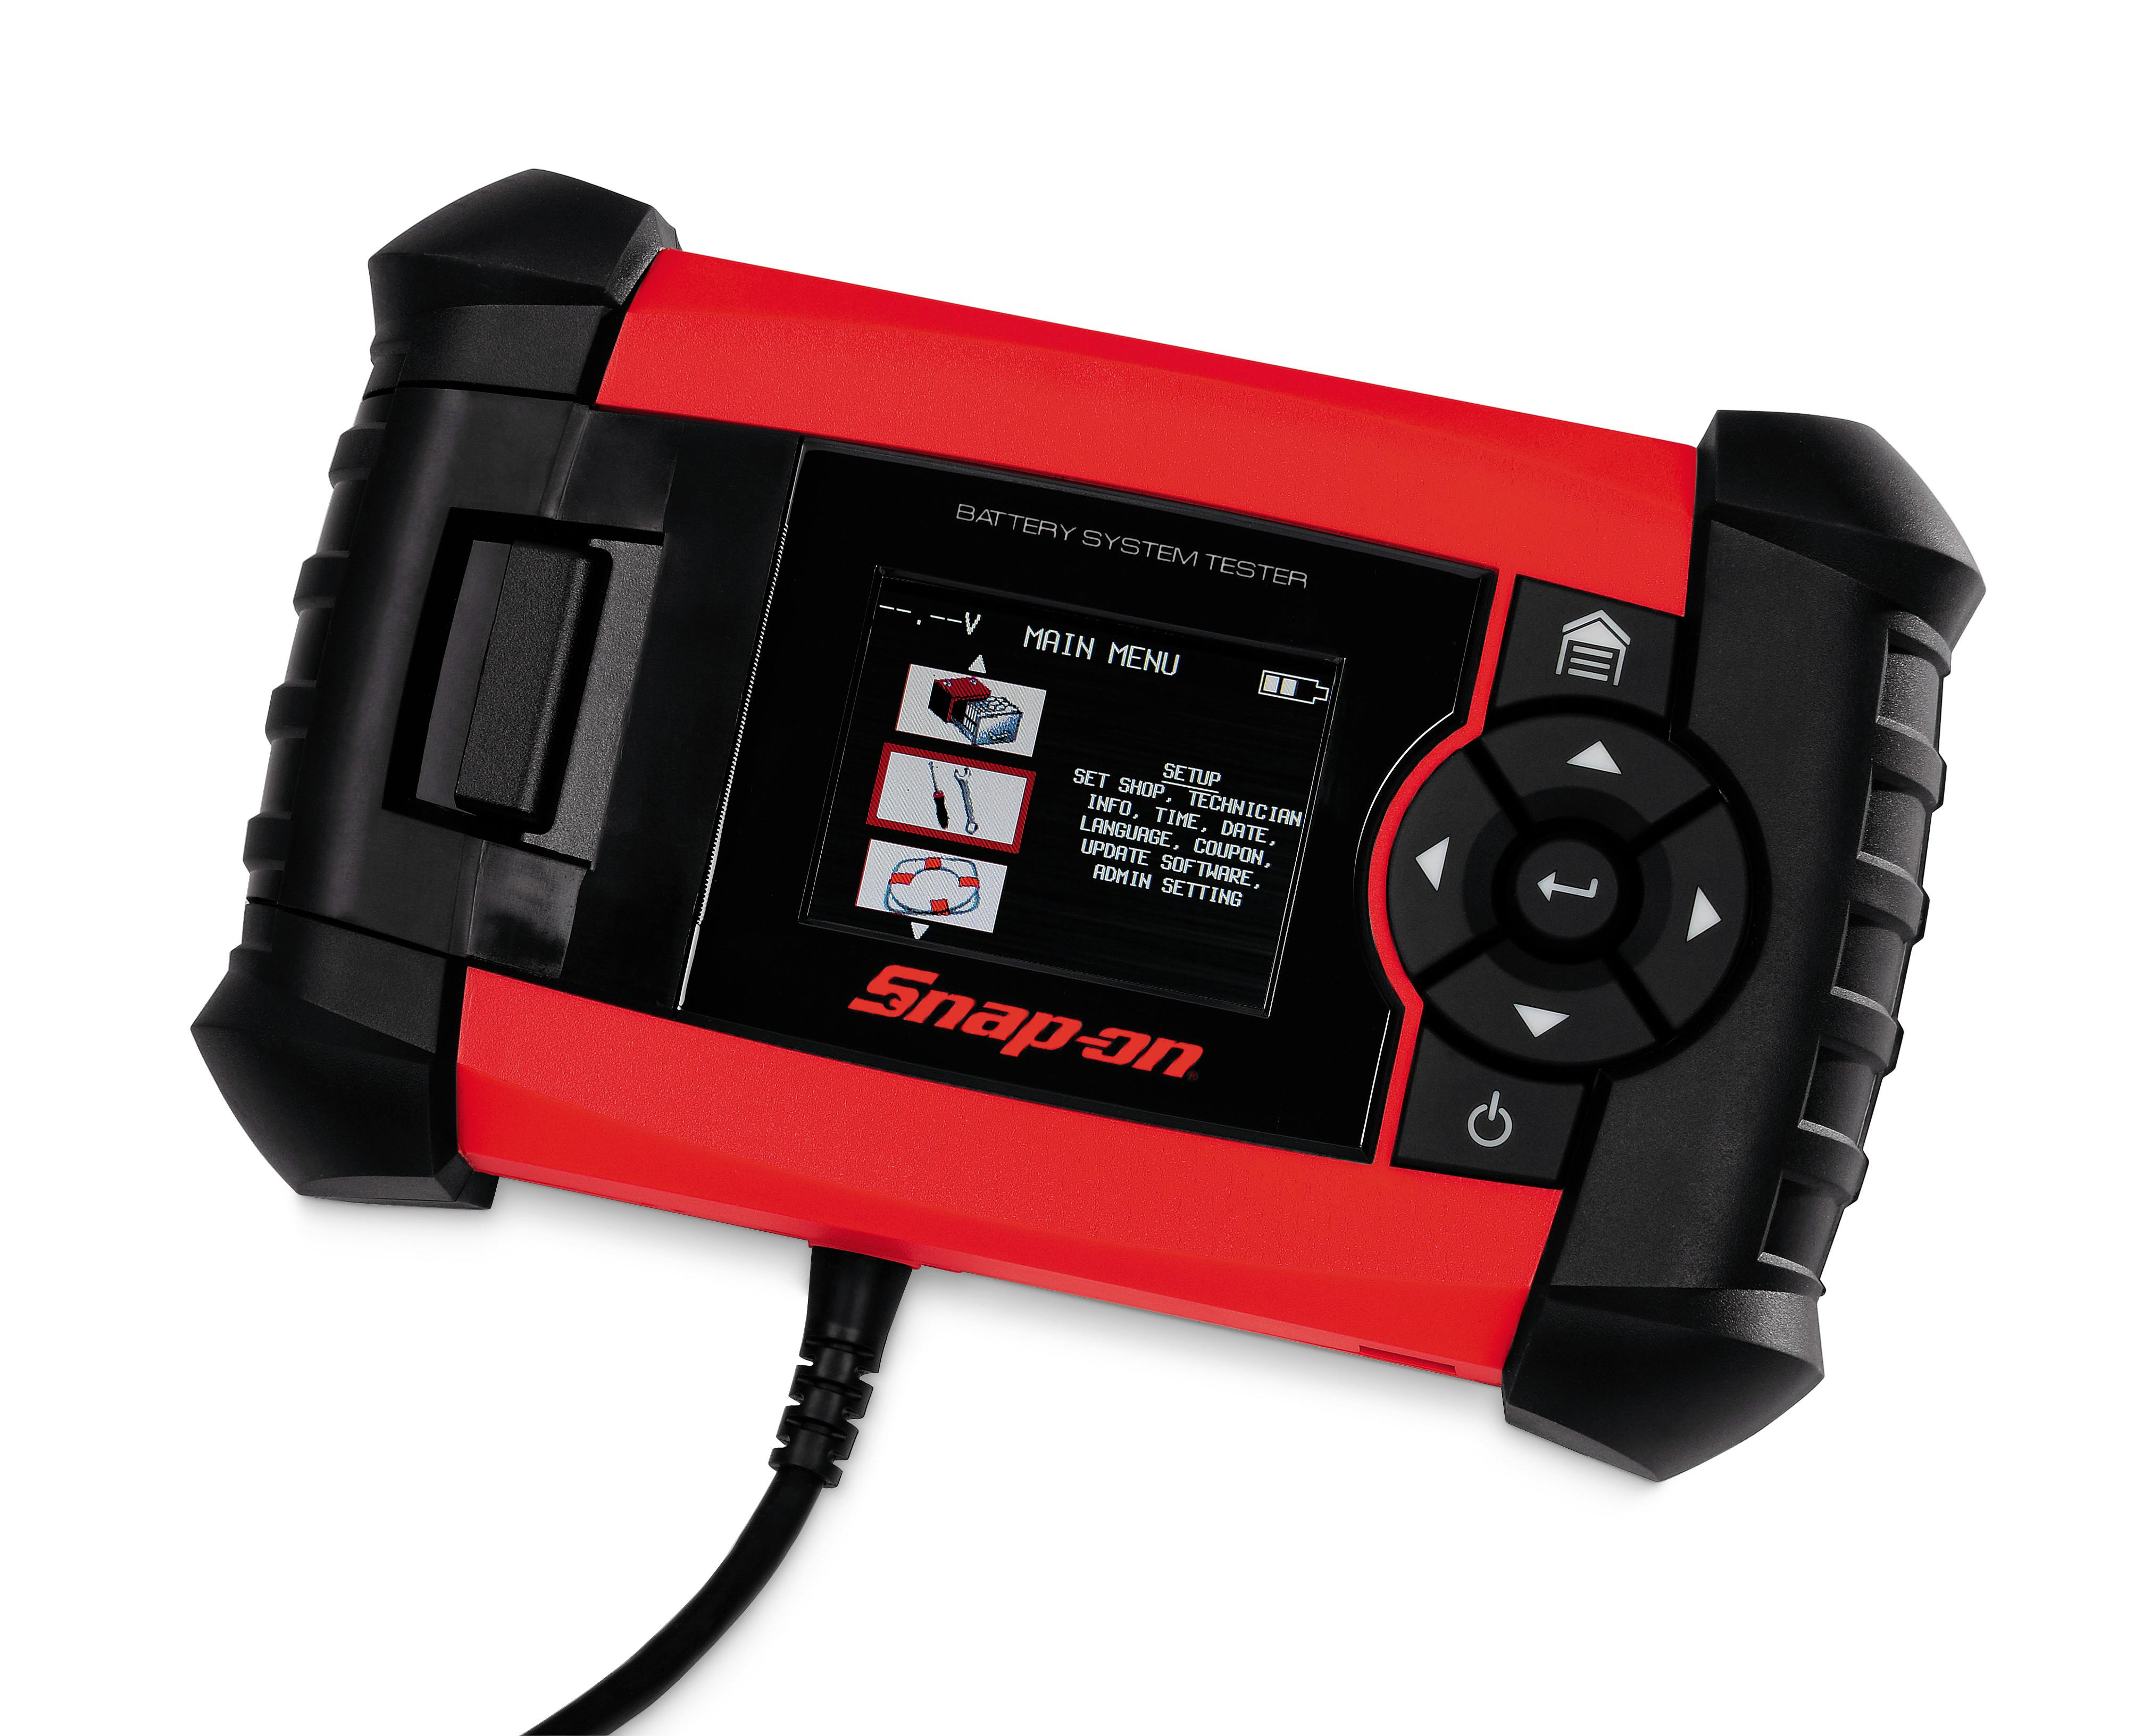 Electronic Battery System Testers - Snap-on Industrial